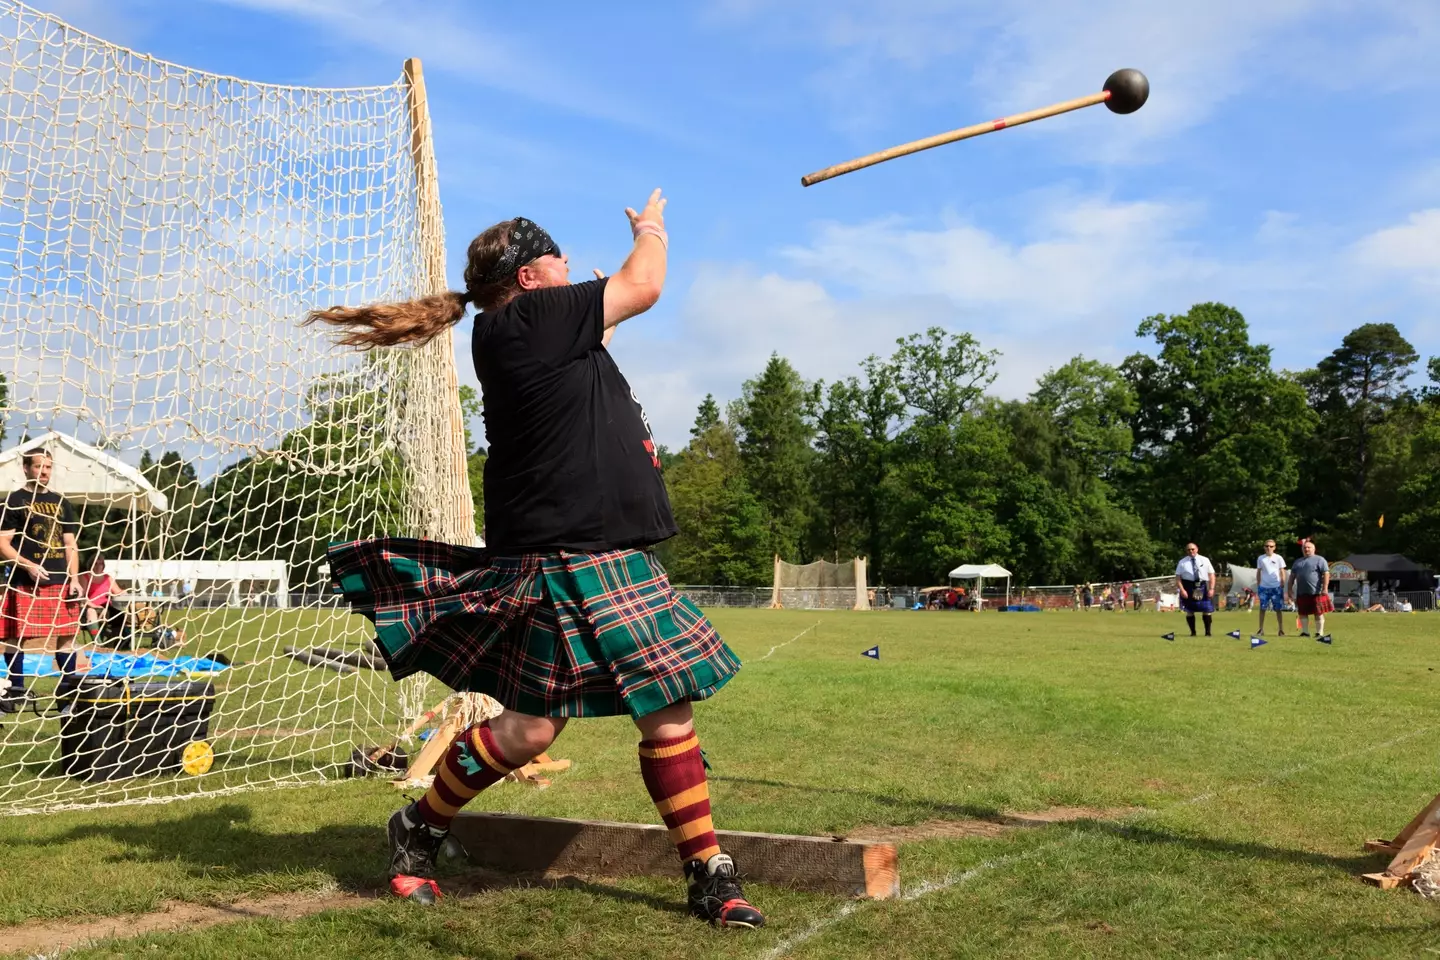 Competitor at Scottish highland games throwing the 22 pound hammer, a traditional Scottish competition.